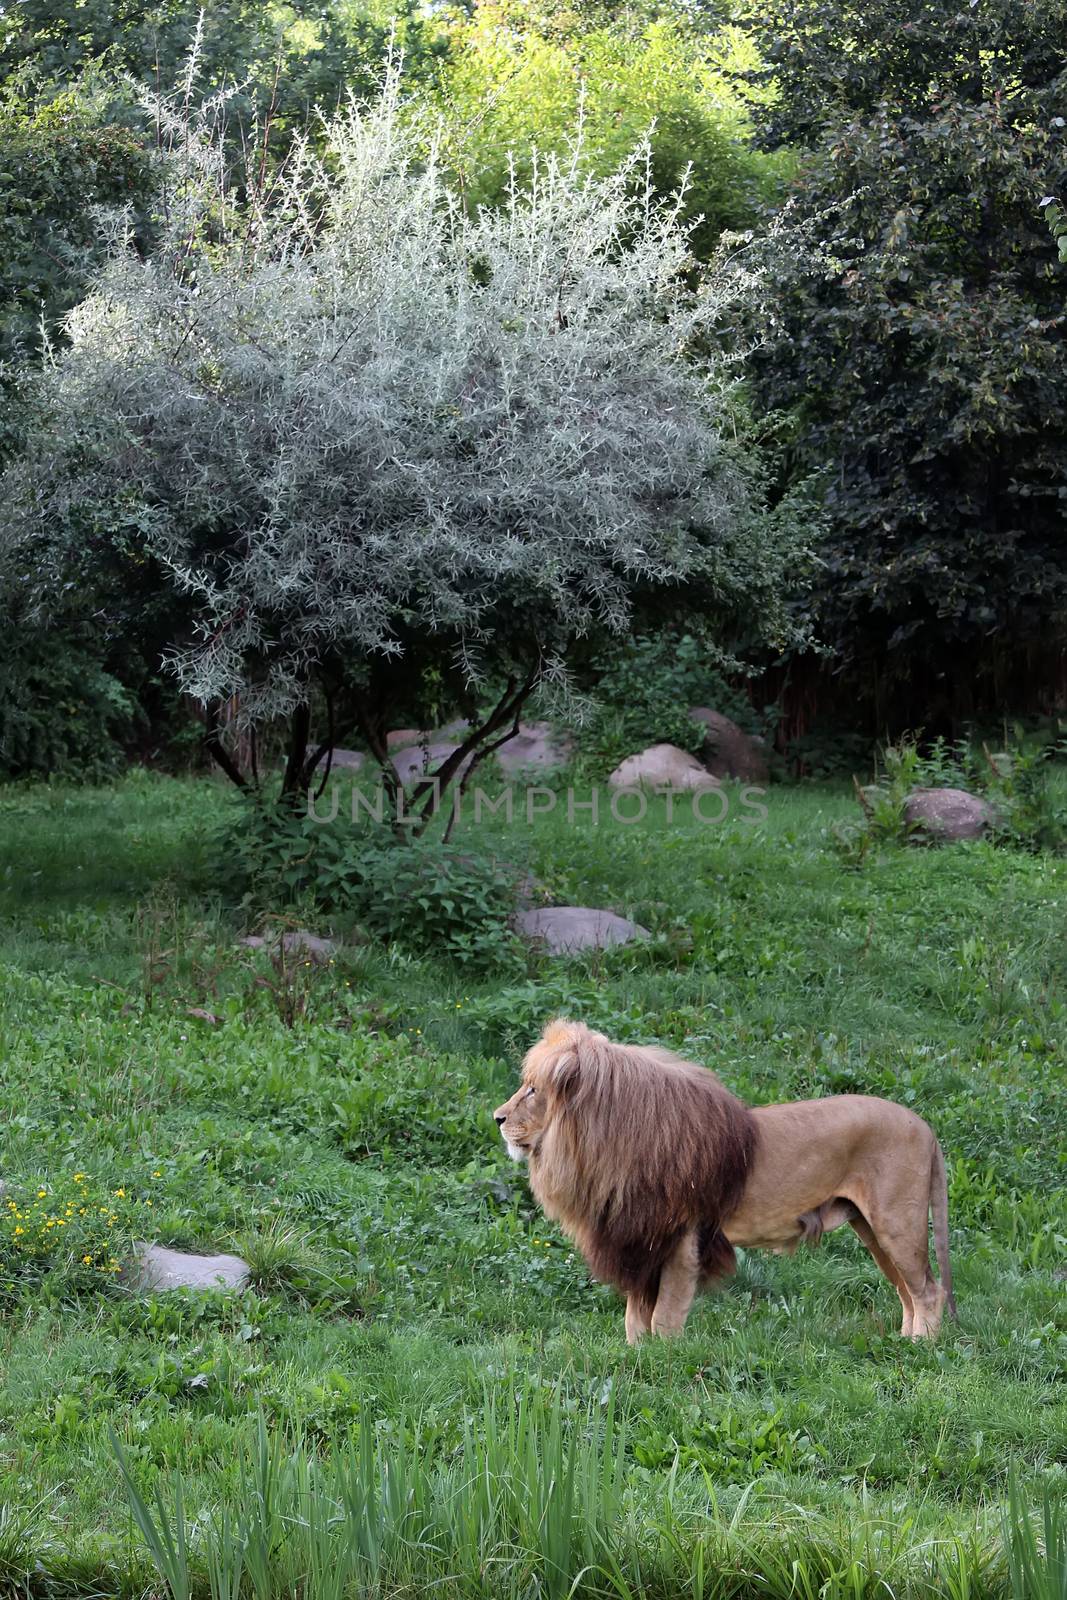 Lion on a background of green grass. Lion with a luxurious mane.